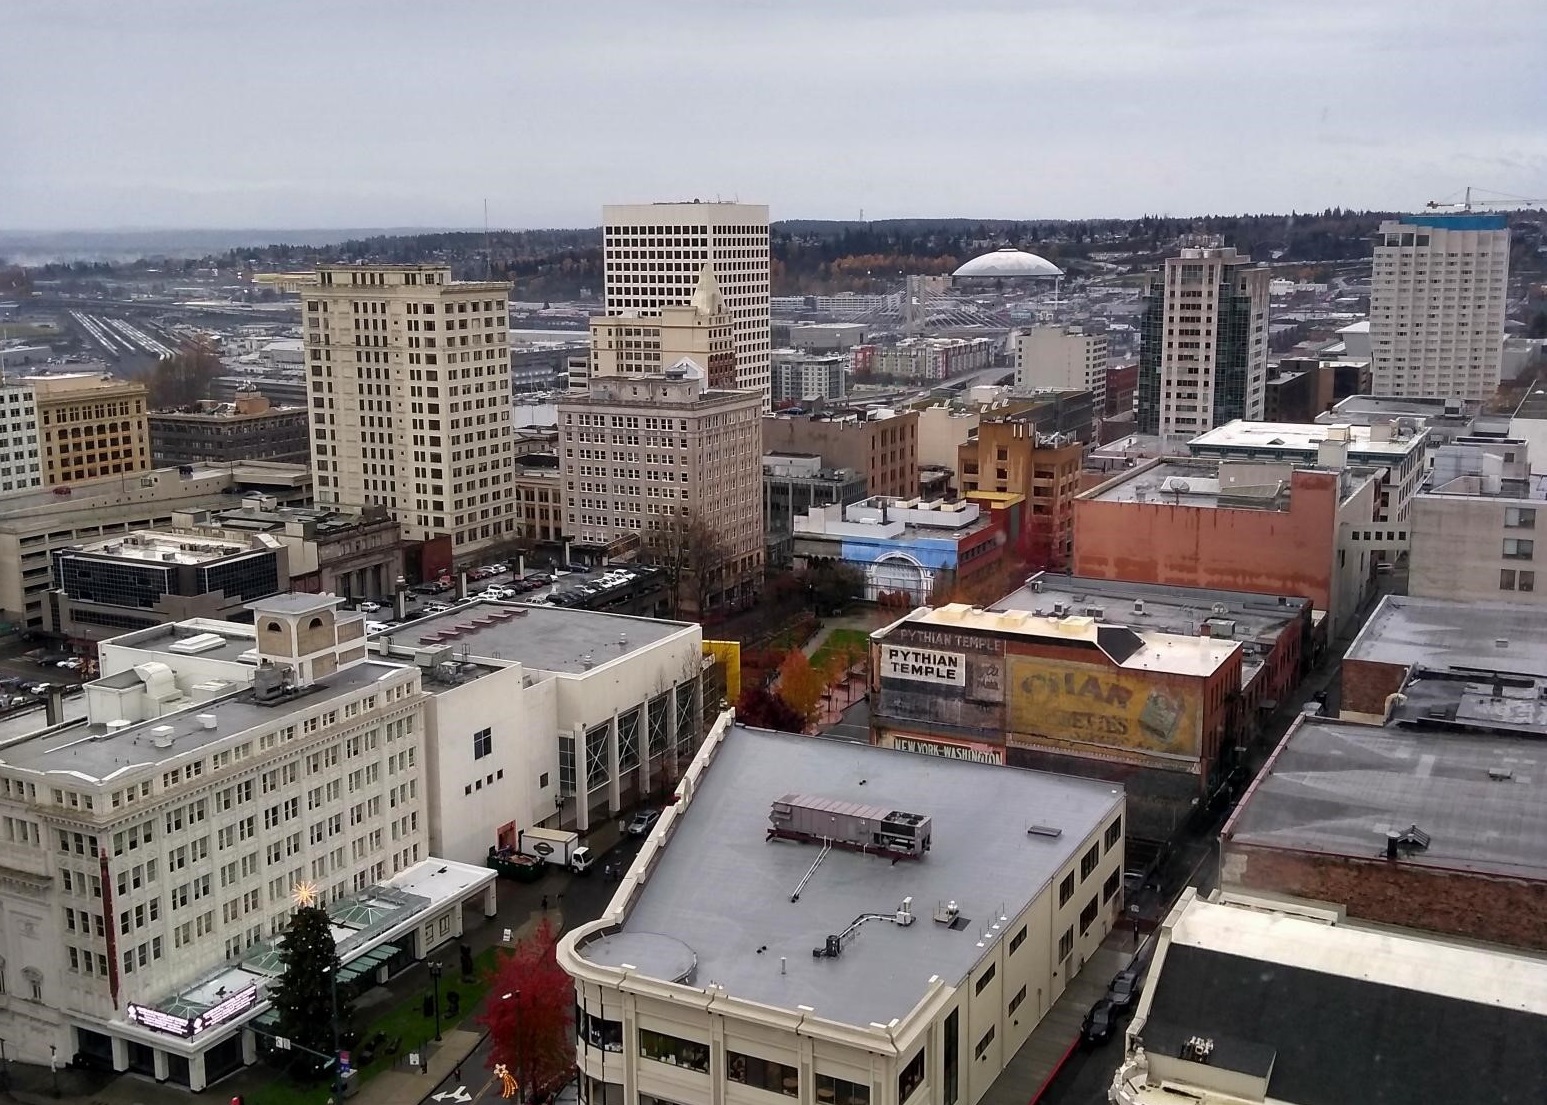 Aerial view of Tacoma from City Hall looking towards Tacoma Dome.